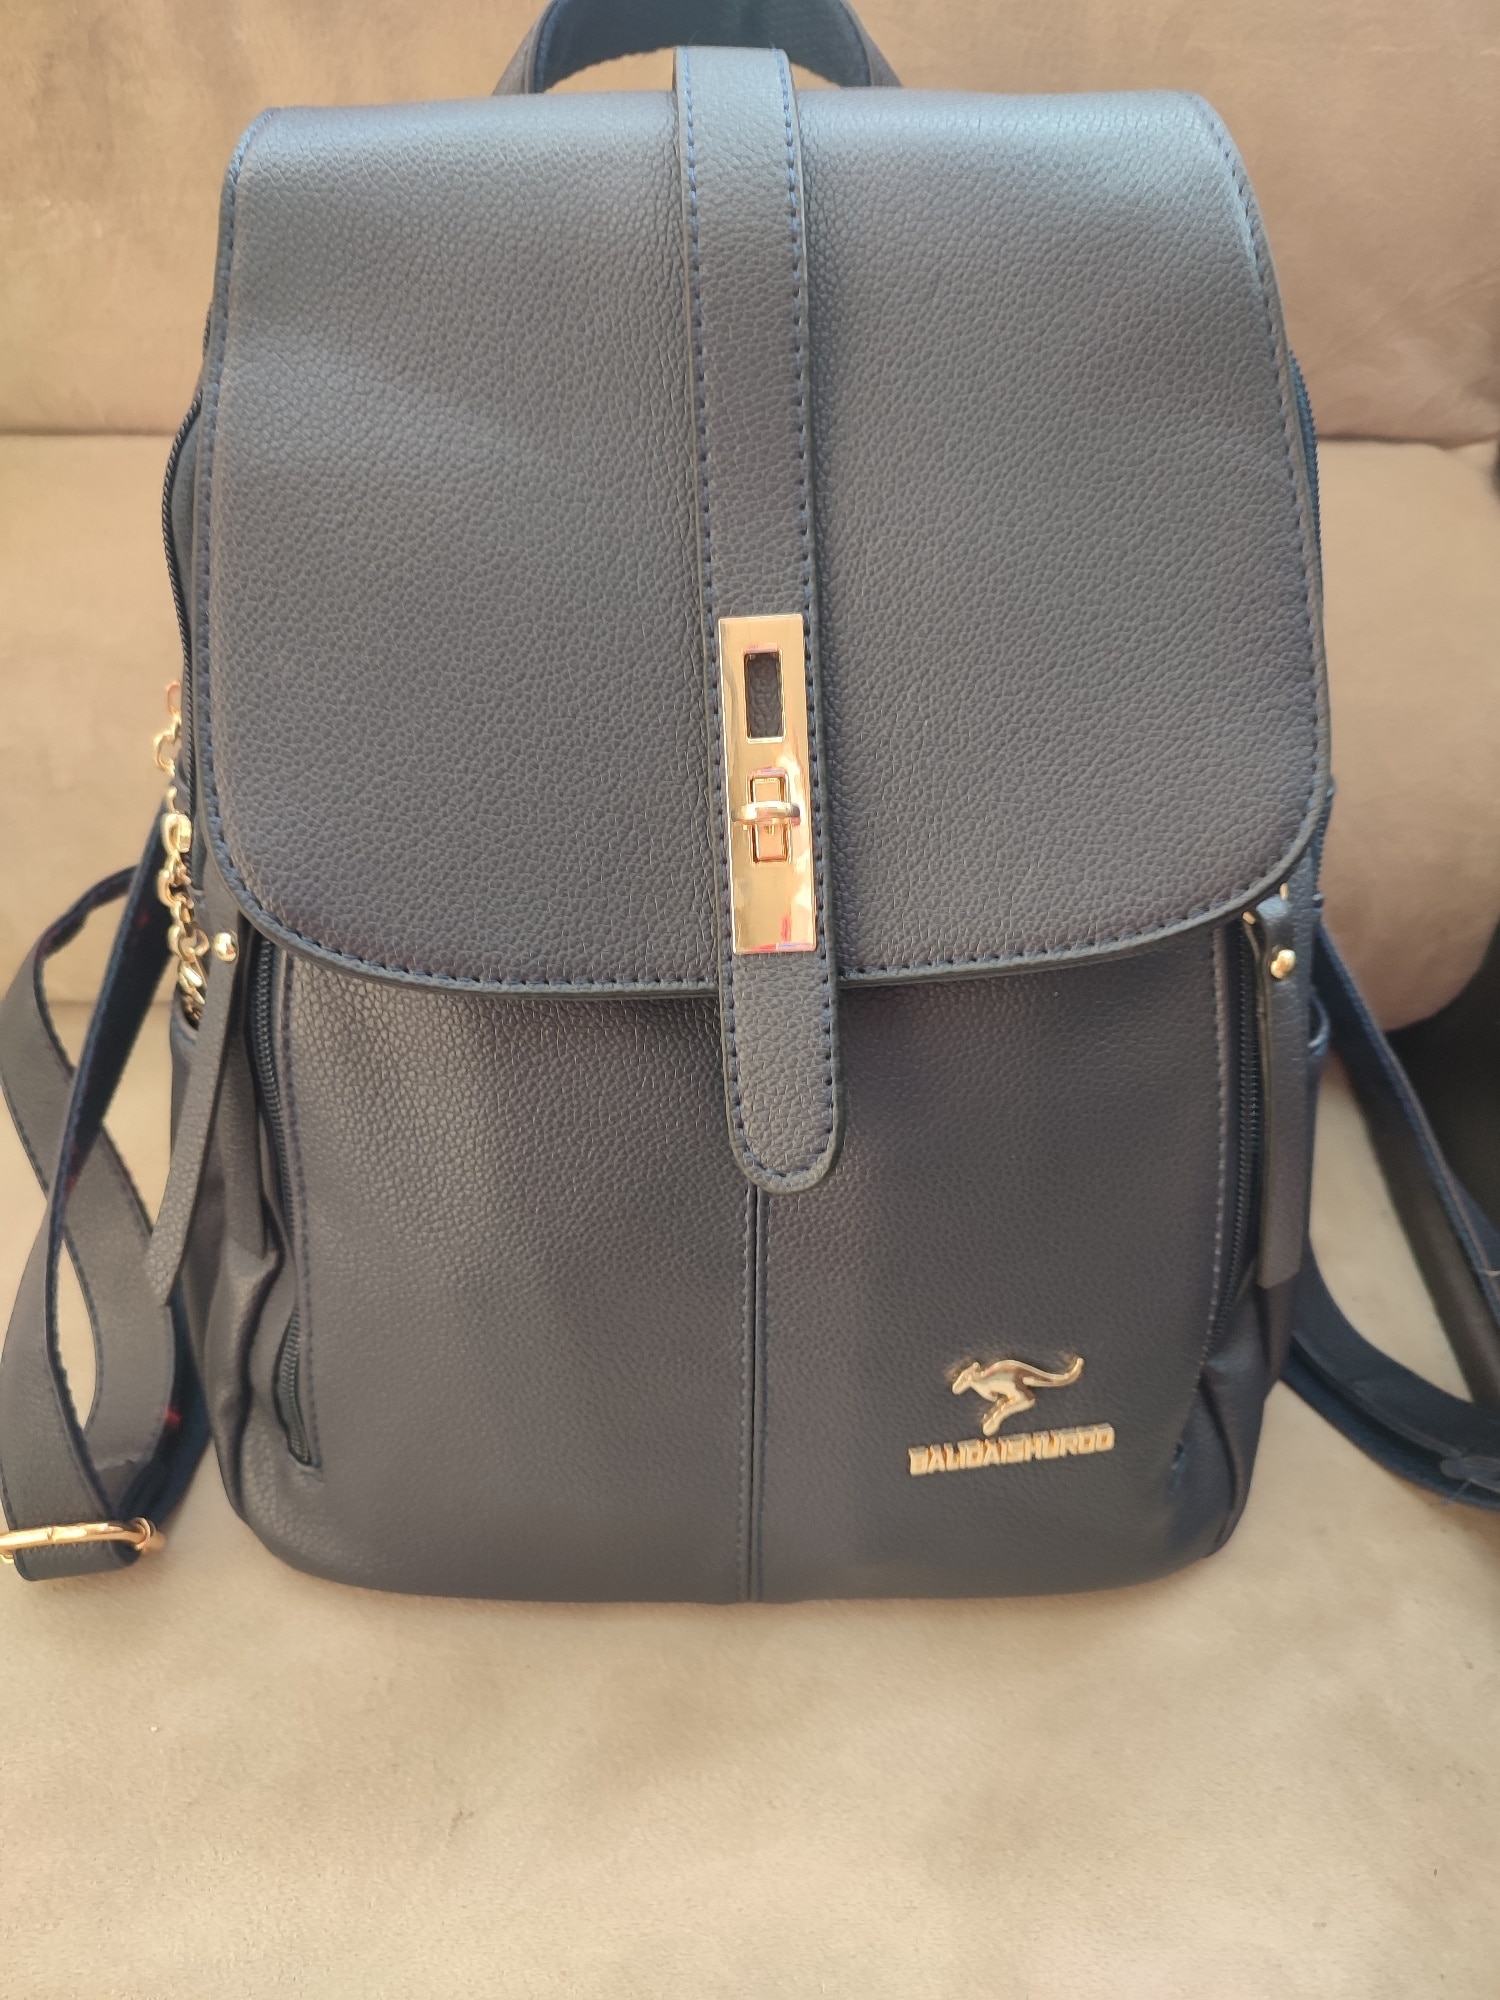 Women's Vintage Leather Backpacks for School, College, Travel, and Everyday photo review